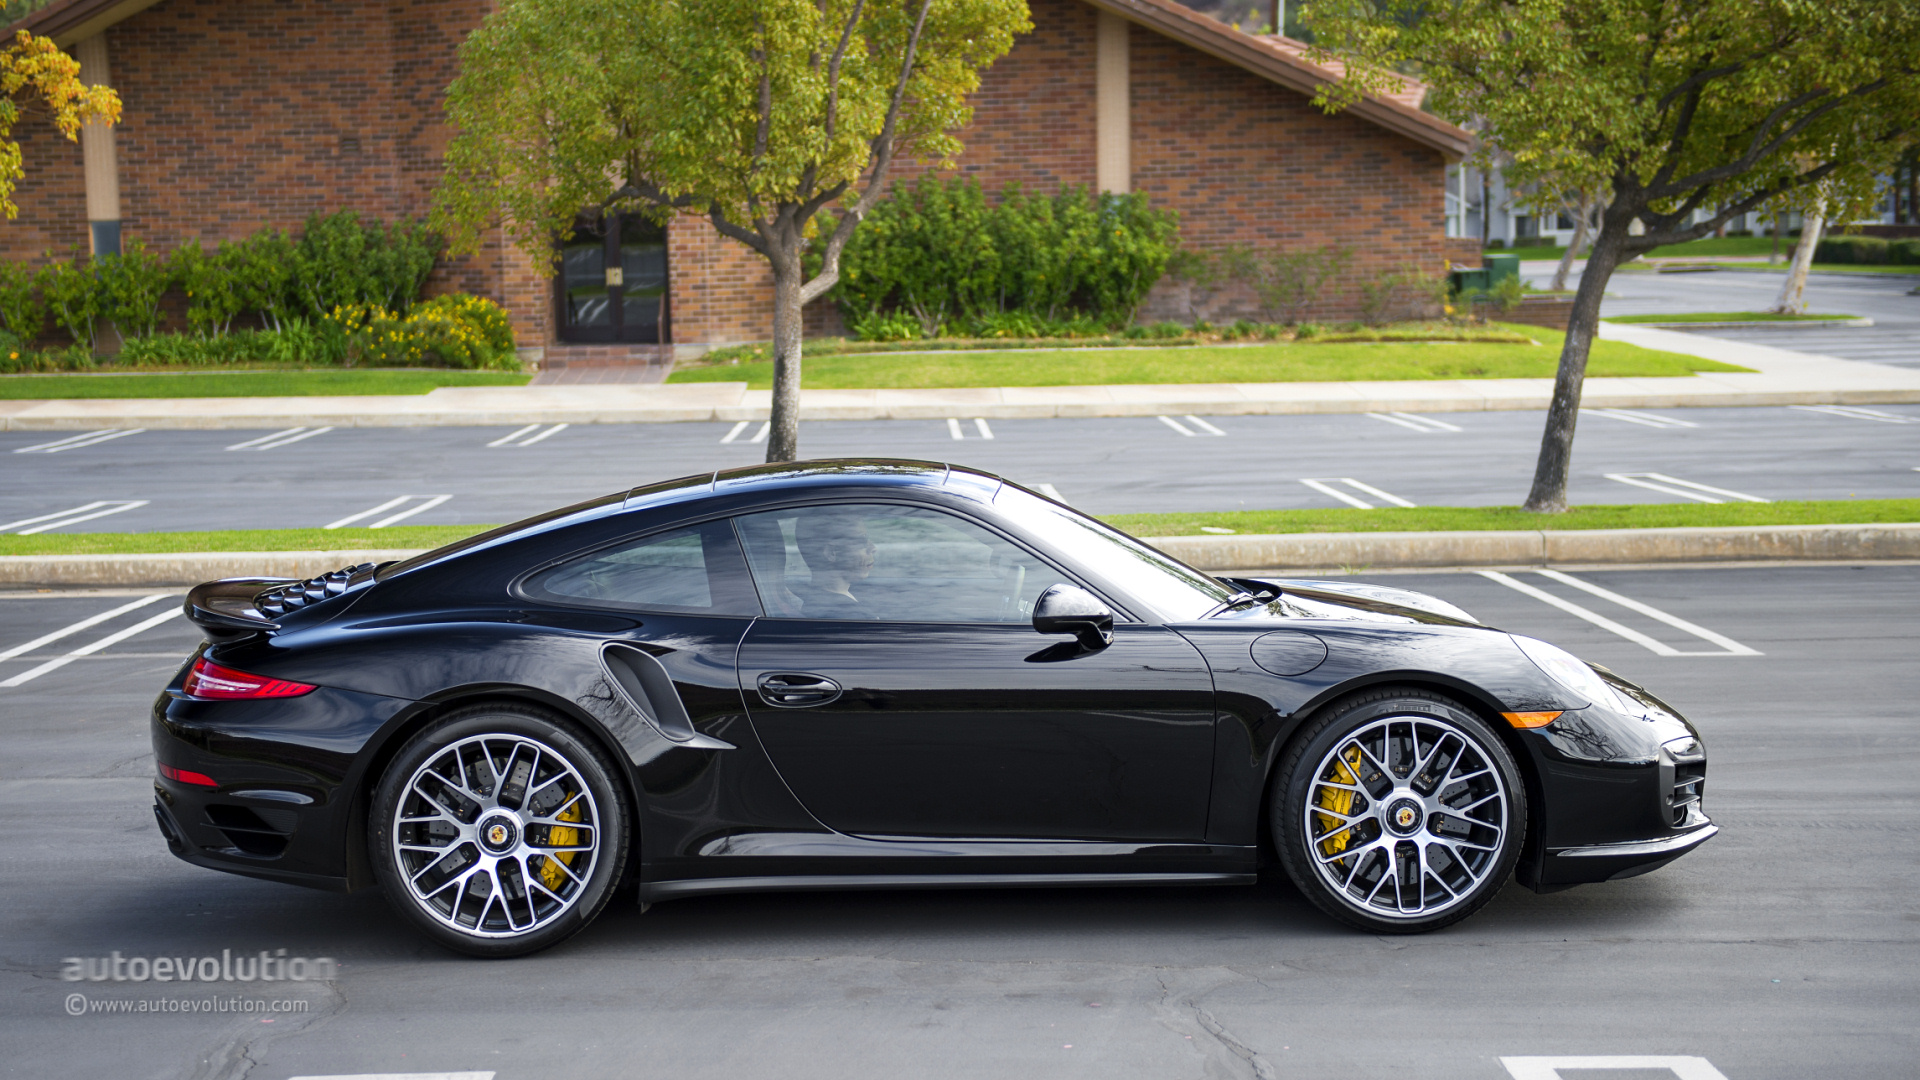 United States AI Solar System (9) - Page 13 2014-porsche-911-turbo-s-review-2014_55